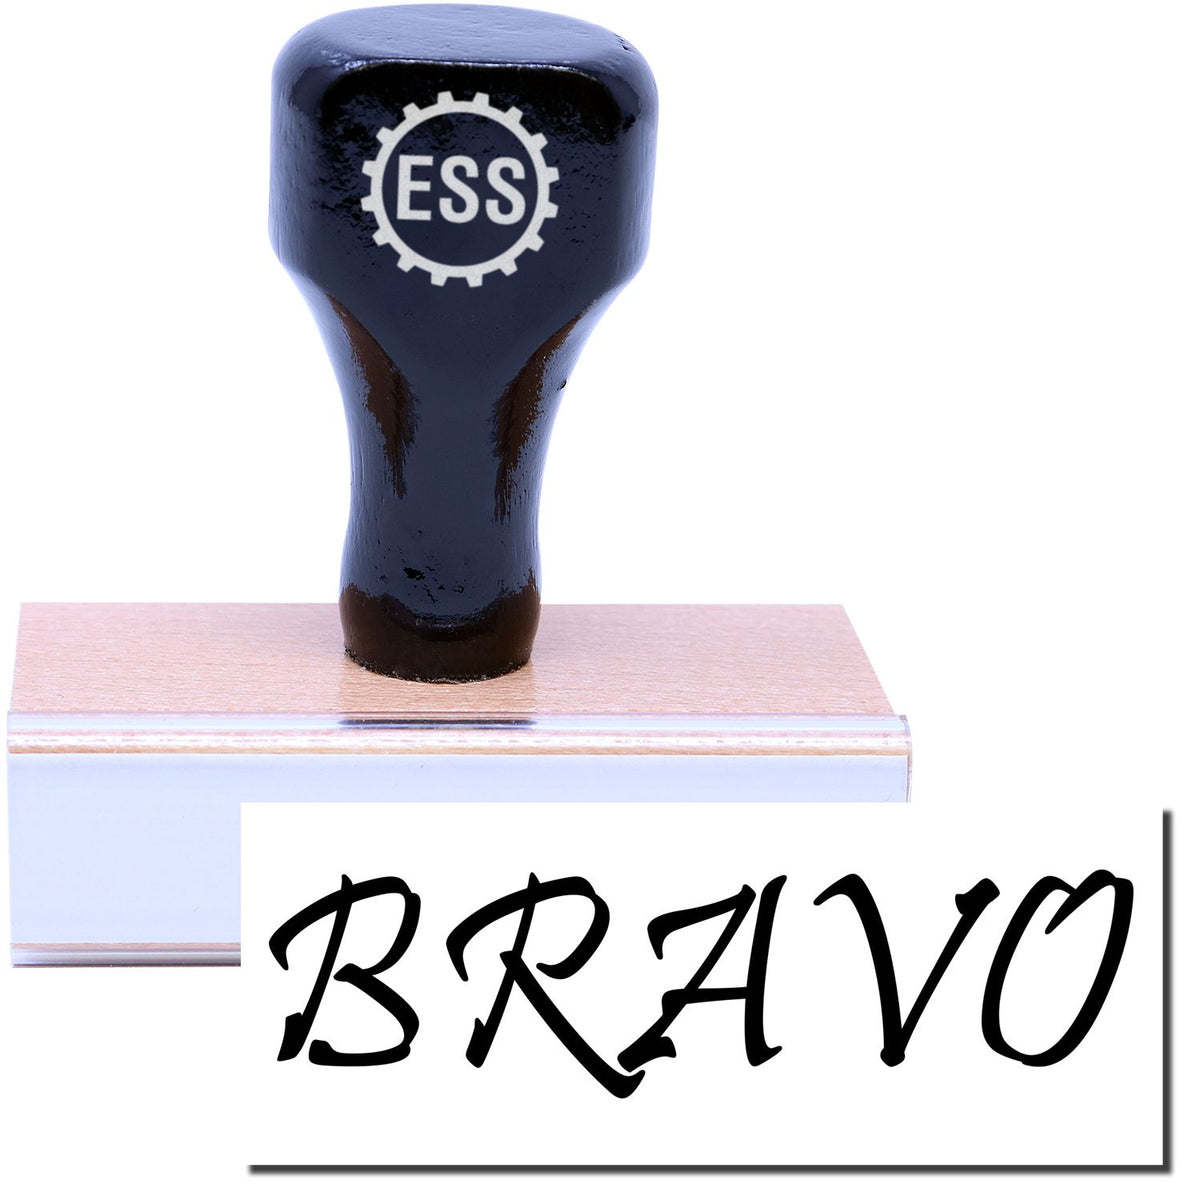 A stock office rubber stamp with a stamped image showing how the text &quot;BRAVO&quot; is displayed after stamping.